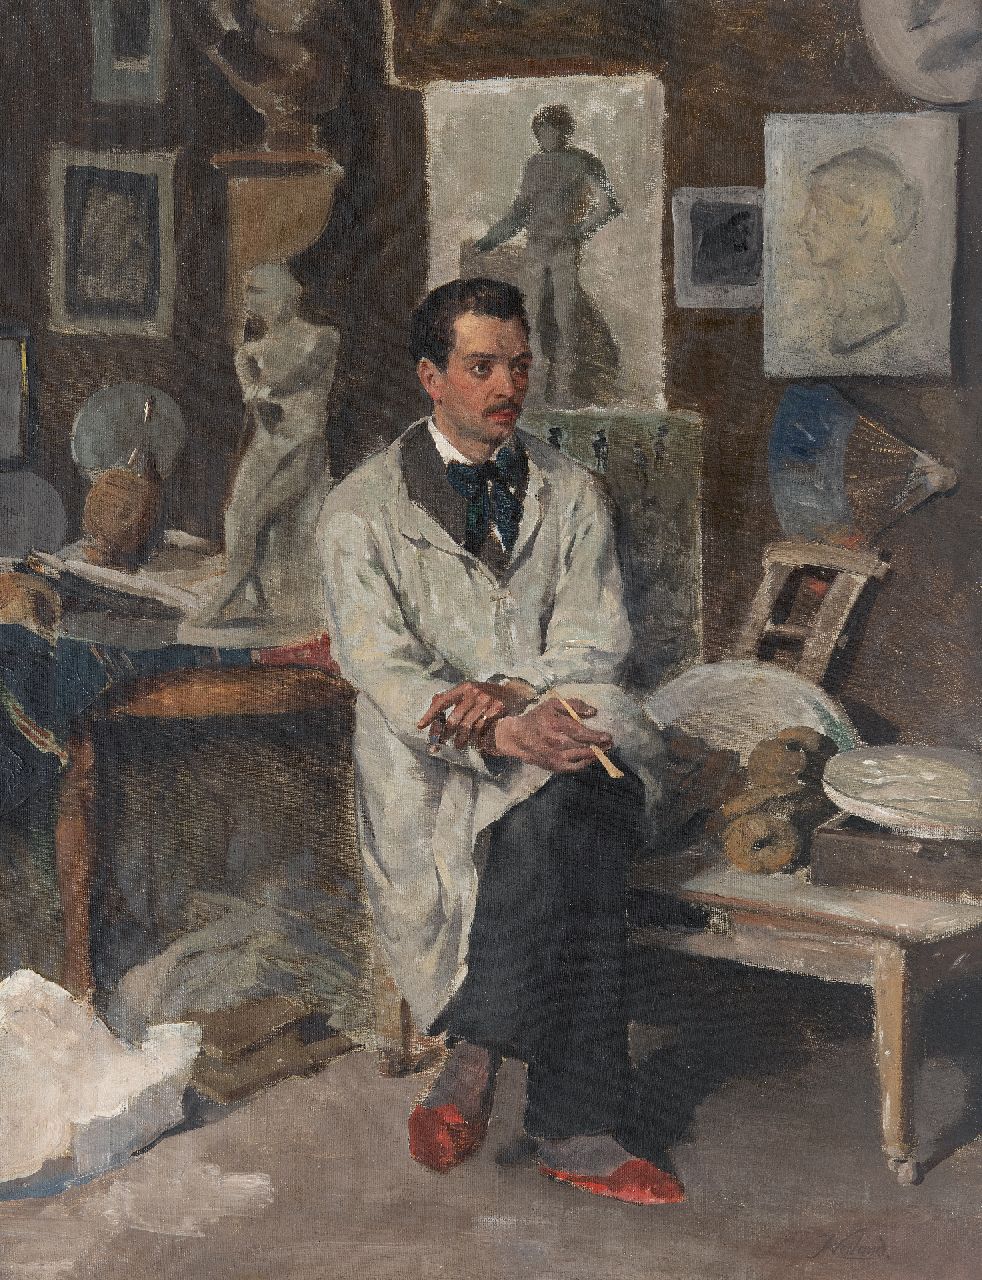 Weiland J.  | Johannes Weiland, Artist in his studio, oil on canvas 49.2 x 37.7 cm, signed l.r.